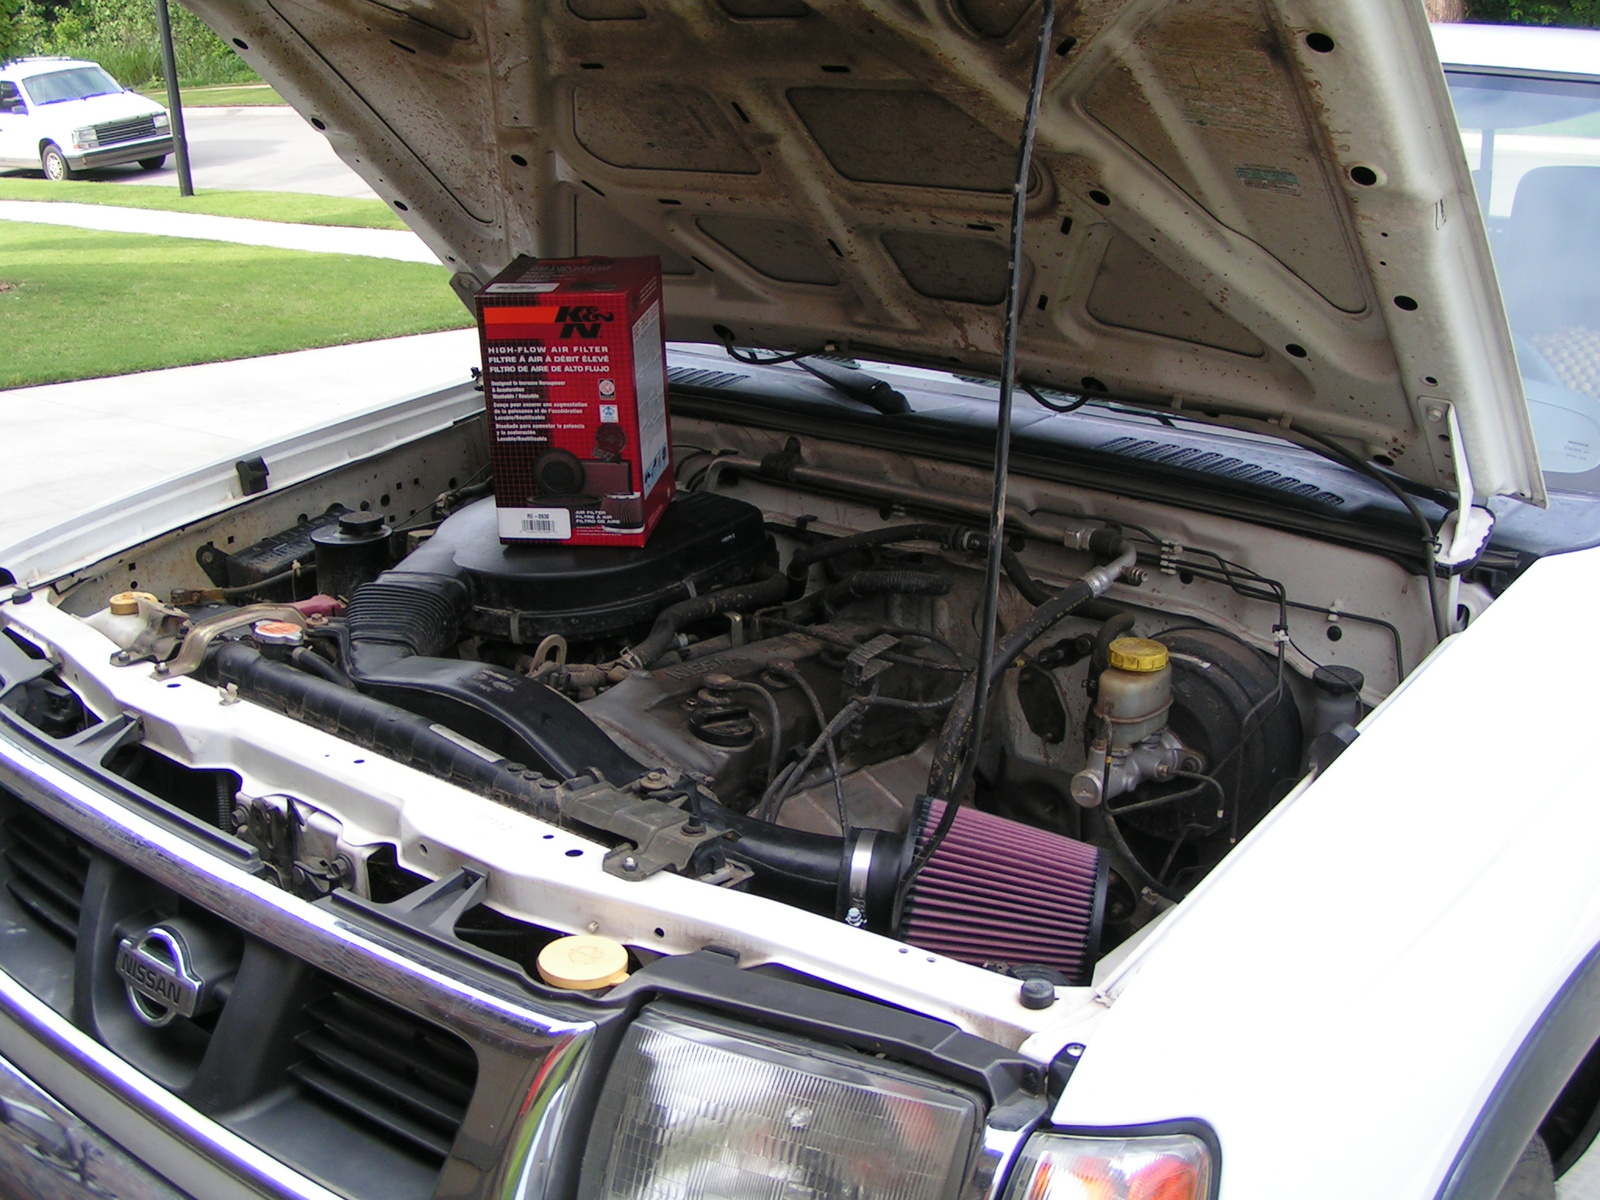 Used 1998 nissan frontier engine